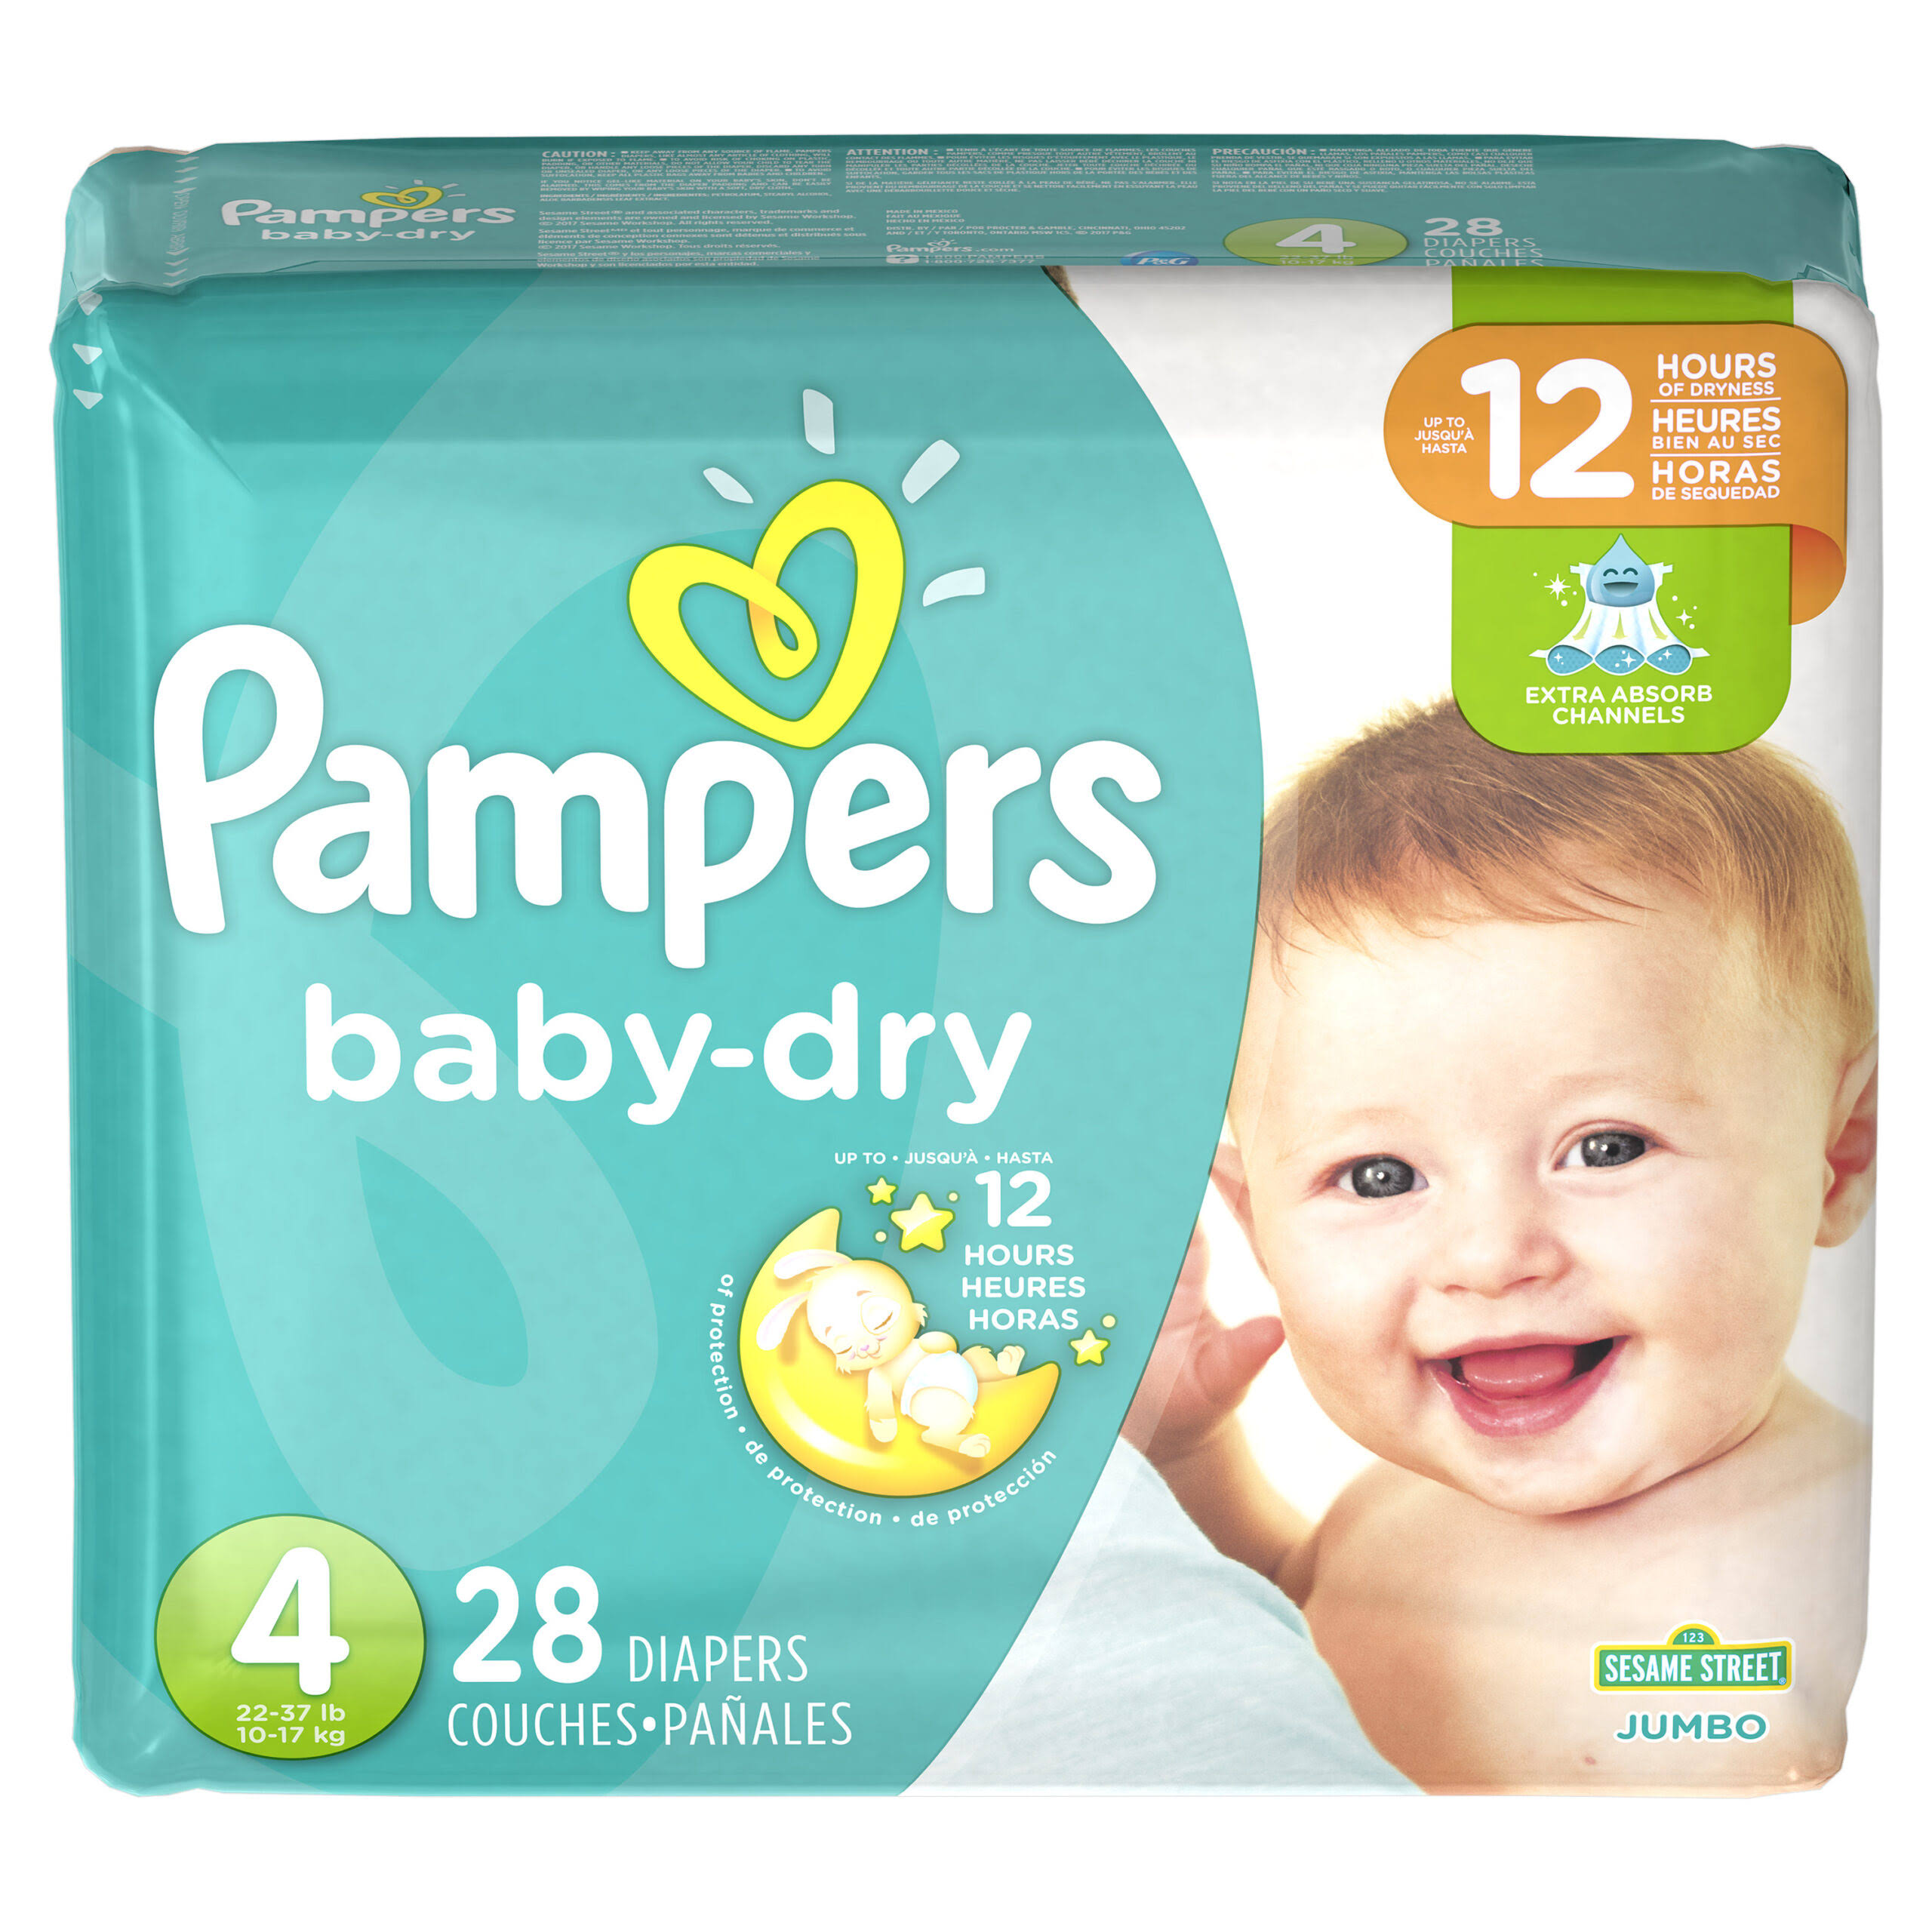 Pampers Baby Dry Size 4 22-37 lb Diapers - 28pk